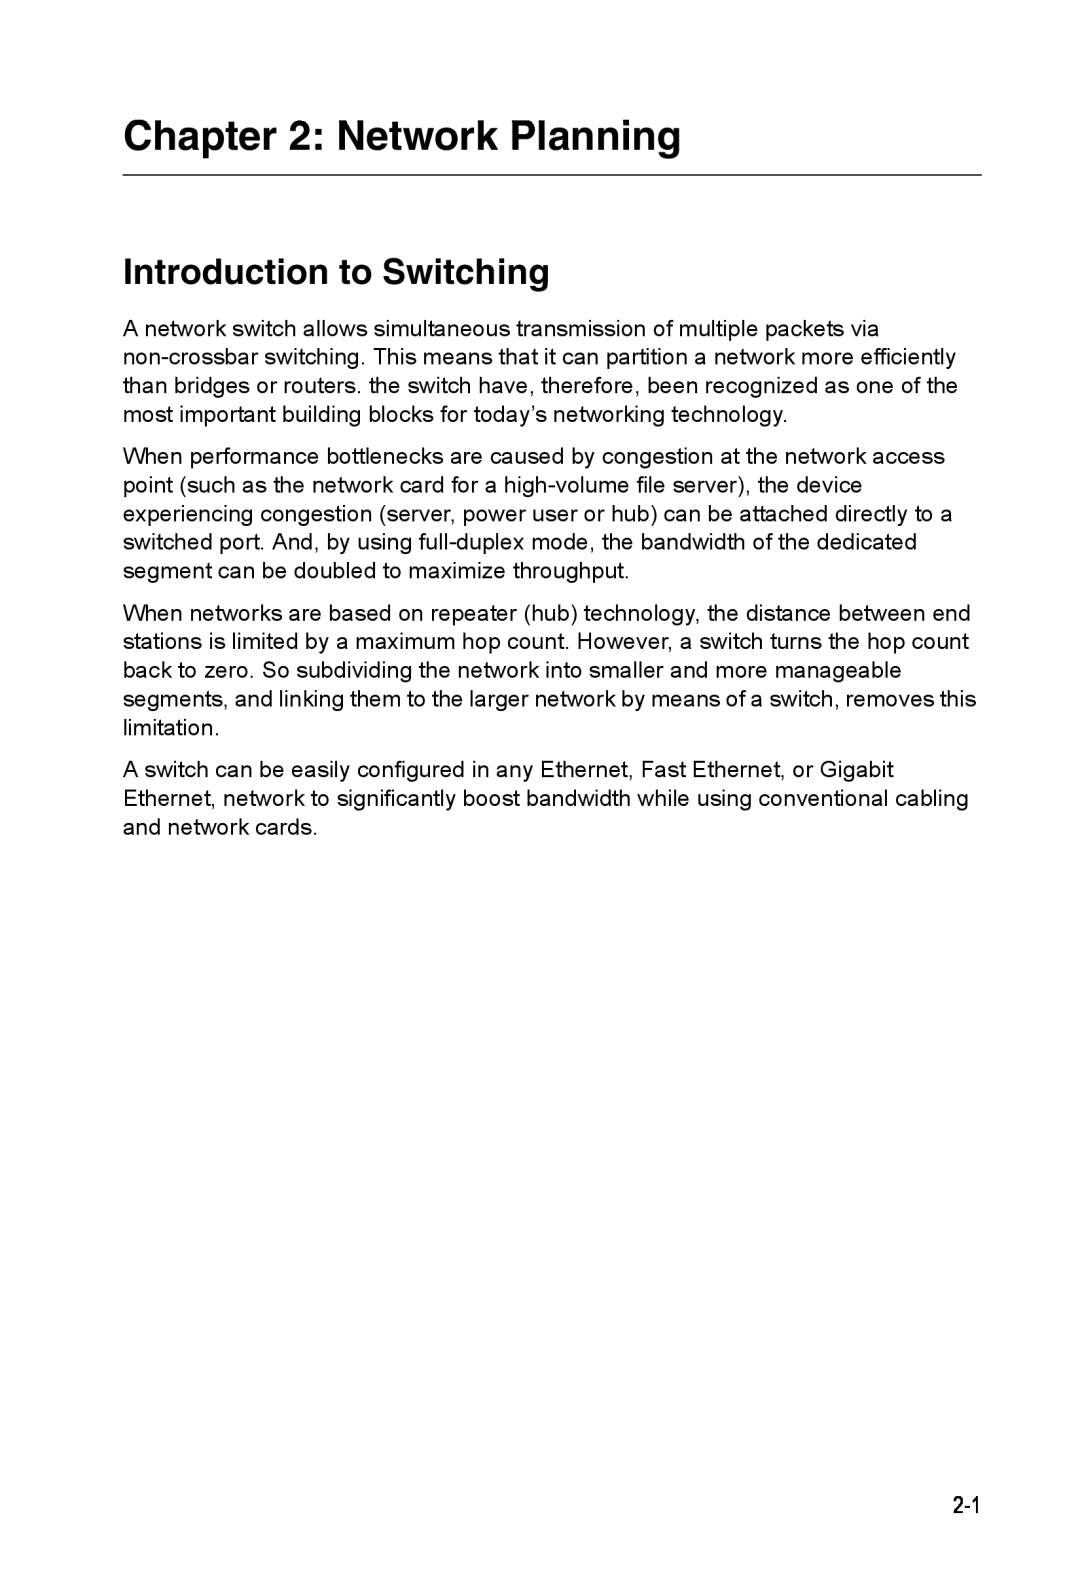 Accton Technology ES4324 manual Network Planning, Introduction to Switching 